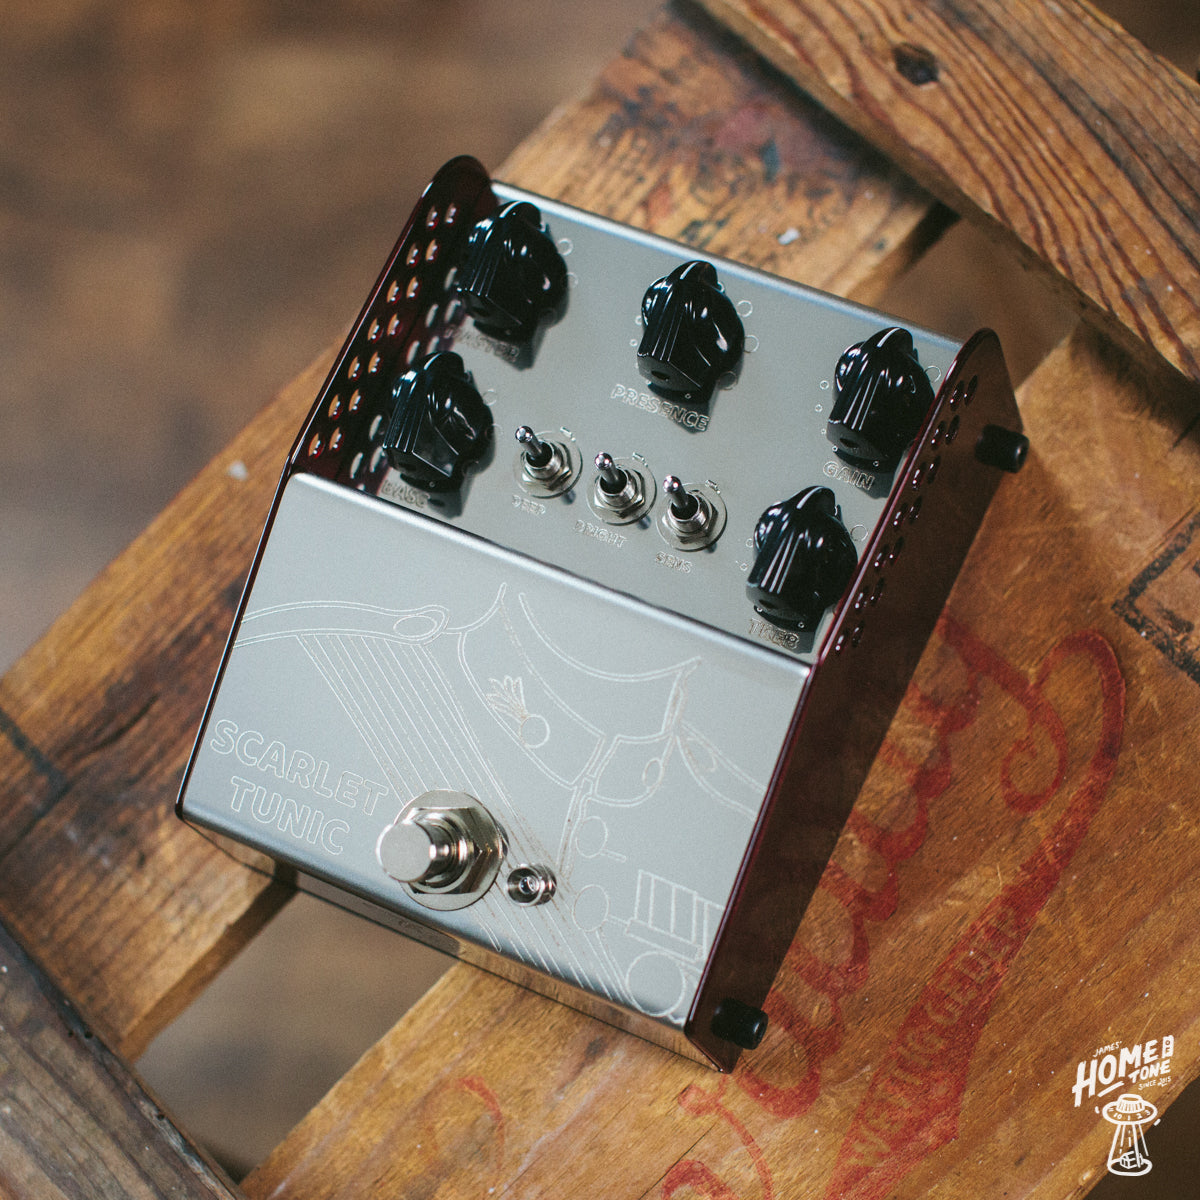 All new pedal from ThorpyFX just launched! 'The Scarlet Tunic' - Analog amp emulator